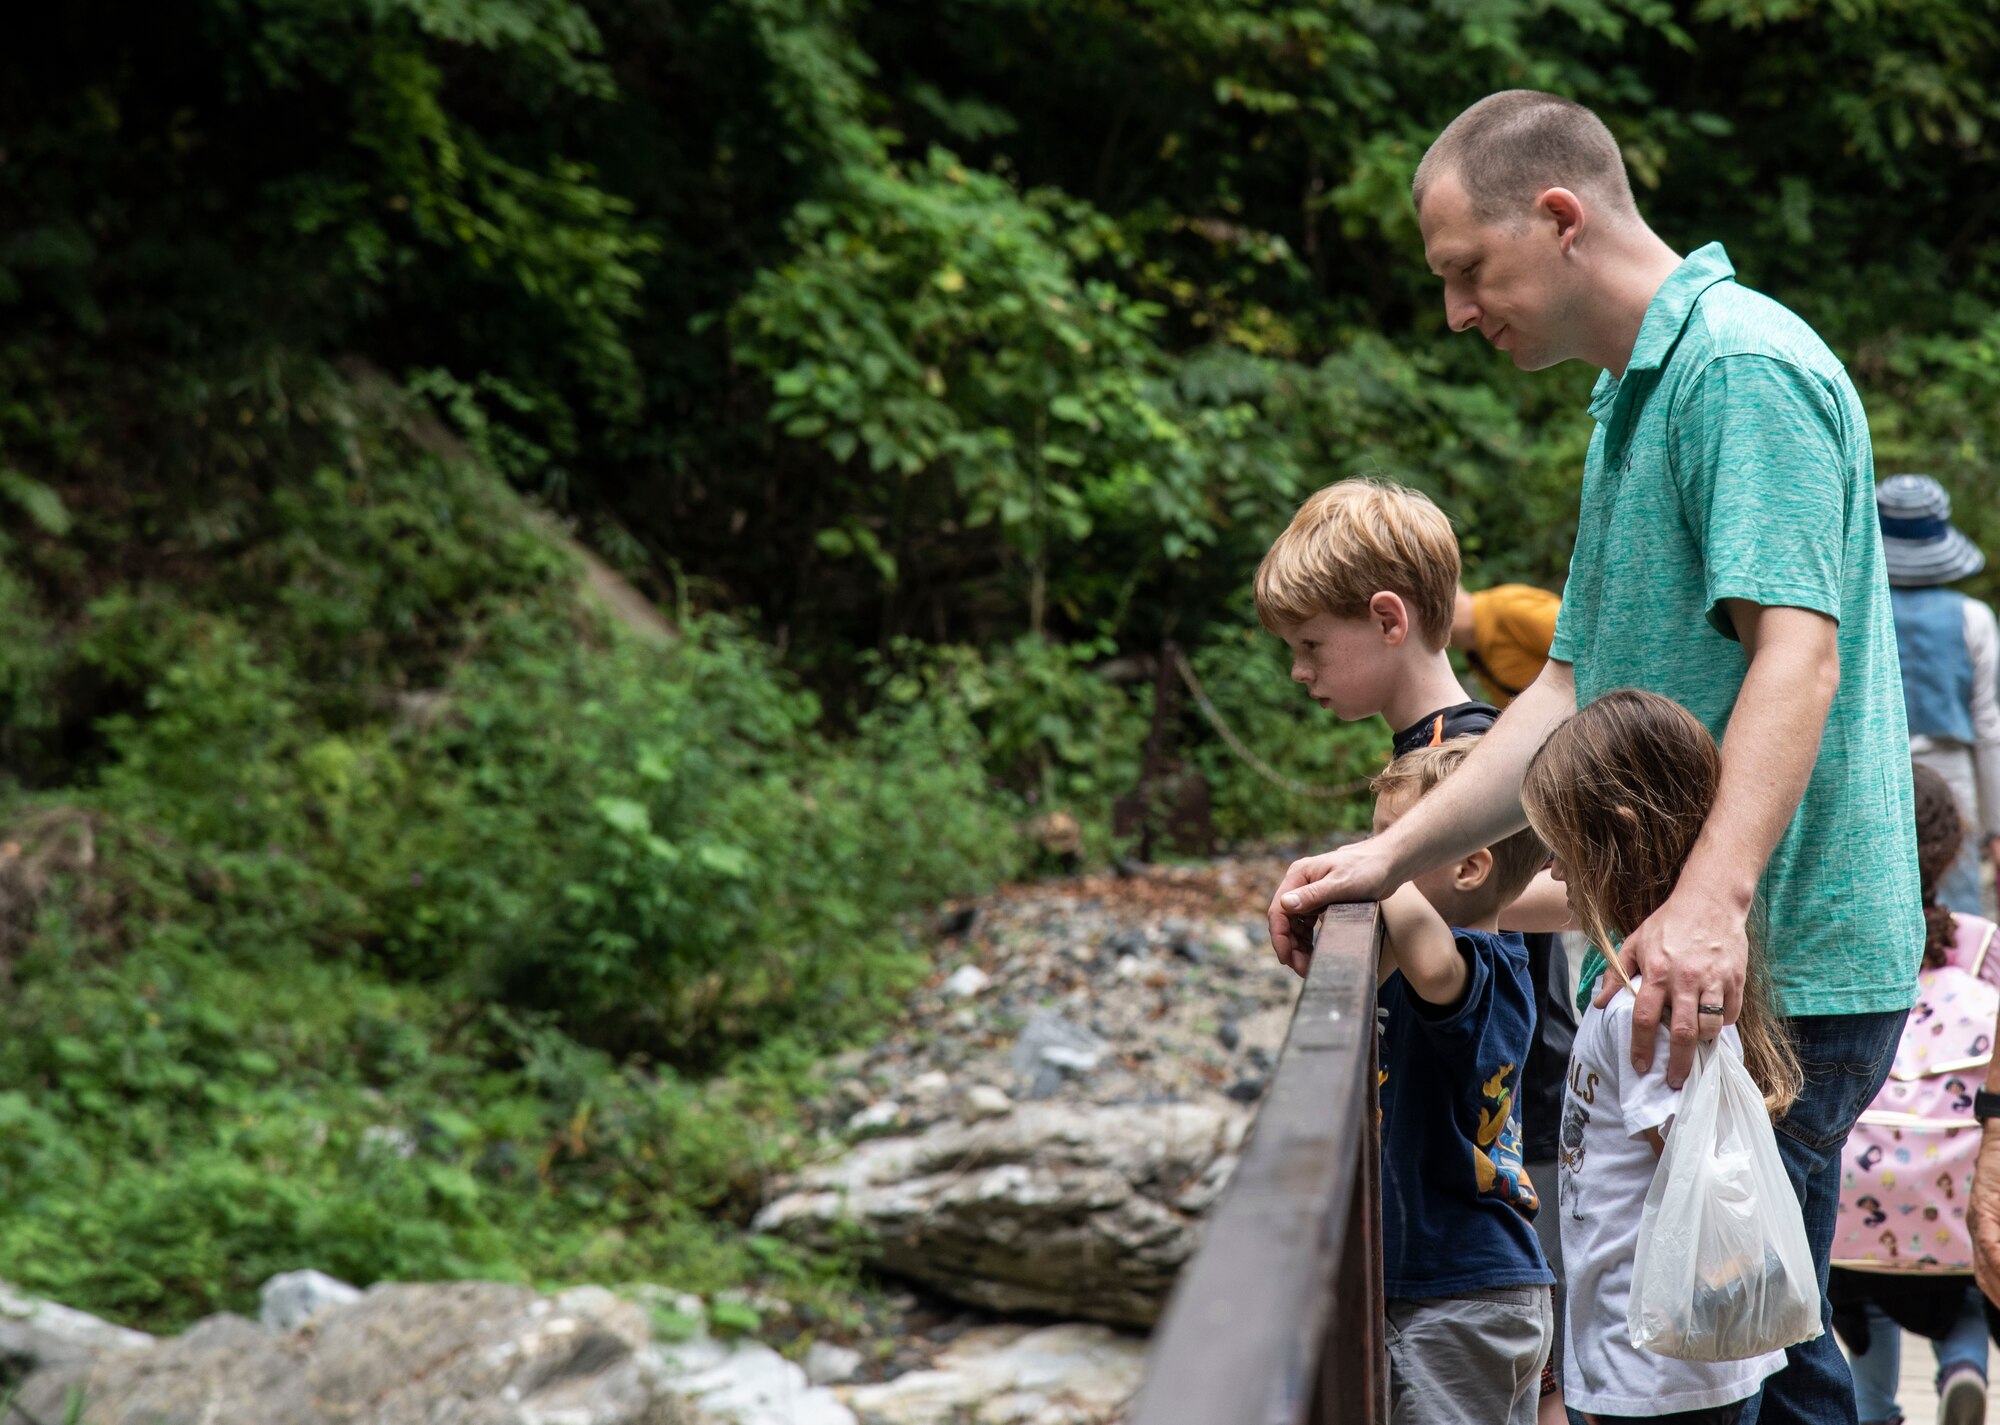 U.S. Air Force Capt. Joshua Hammans, a 35th Fighter Wing chaplain, and his children, look at a water stream during a 35th Fighter Wing chapel resiliency trip, at Ichinoseki, Japan, Sept. 15, 2018. The chapel took approximately 40 active-duty personnel and their dependents to Geibikei Gorge and Chuson-Ji Temple, Hiraizumi, Japan, in order to strengthen their spiritual and social aspects of the Comprehensive Airmen's Fitness pillars. According to Air Force studies, when Airmen are spiritually, physically, mentally and socially resilient, they reach optimal performance in their daily tasks, better executing the mission. (U.S. Air Force photo by Senior Airman Sadie Colbert)